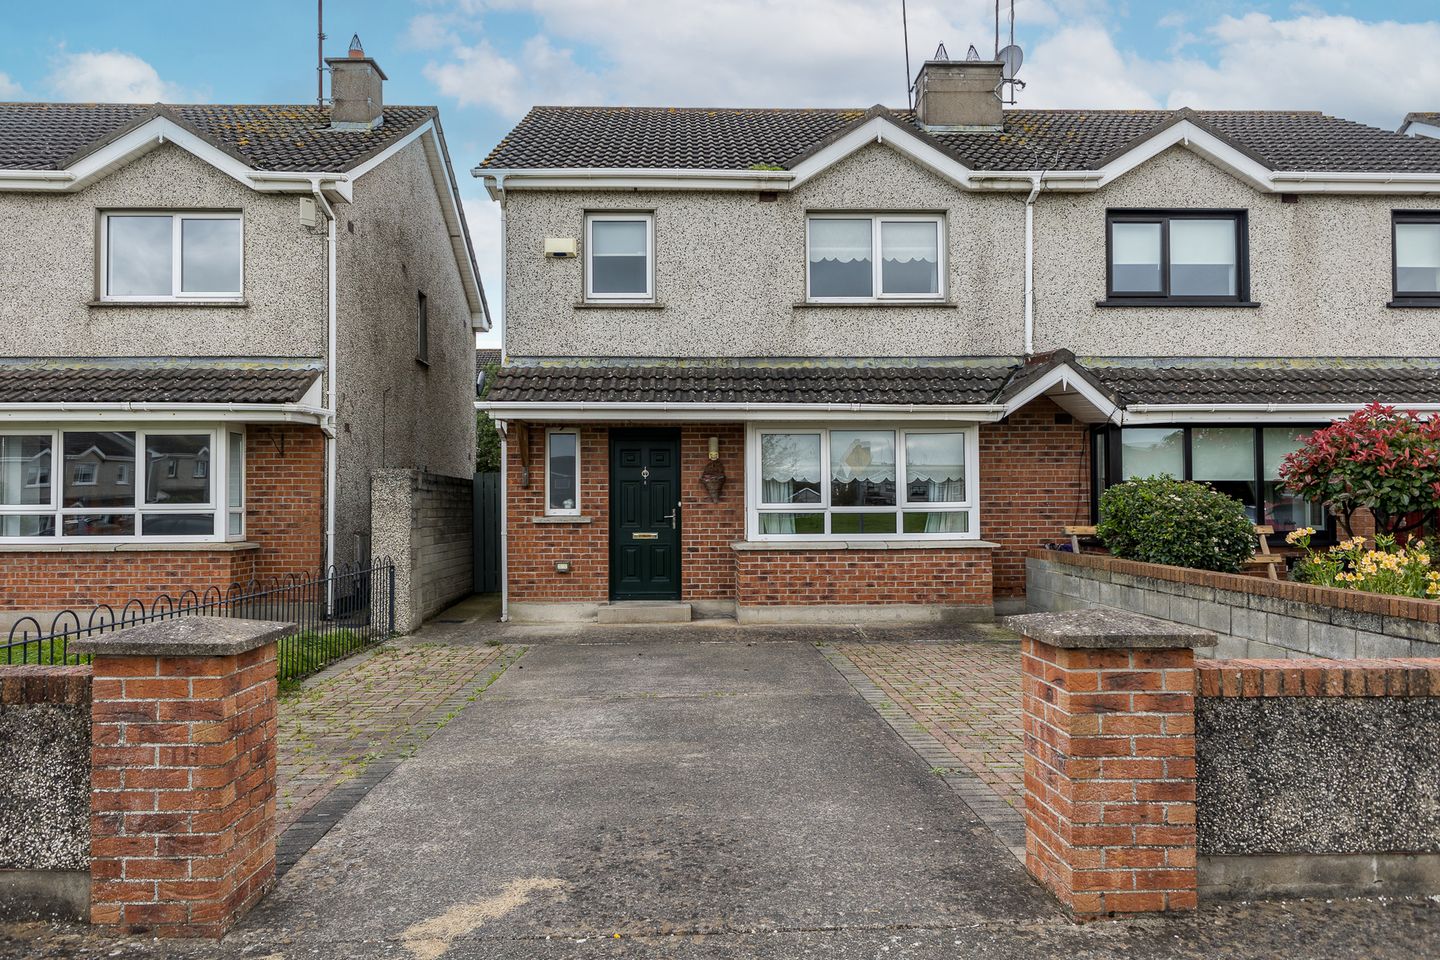 42 Castle Manor, Drogheda, Co. Louth, A92A2HW